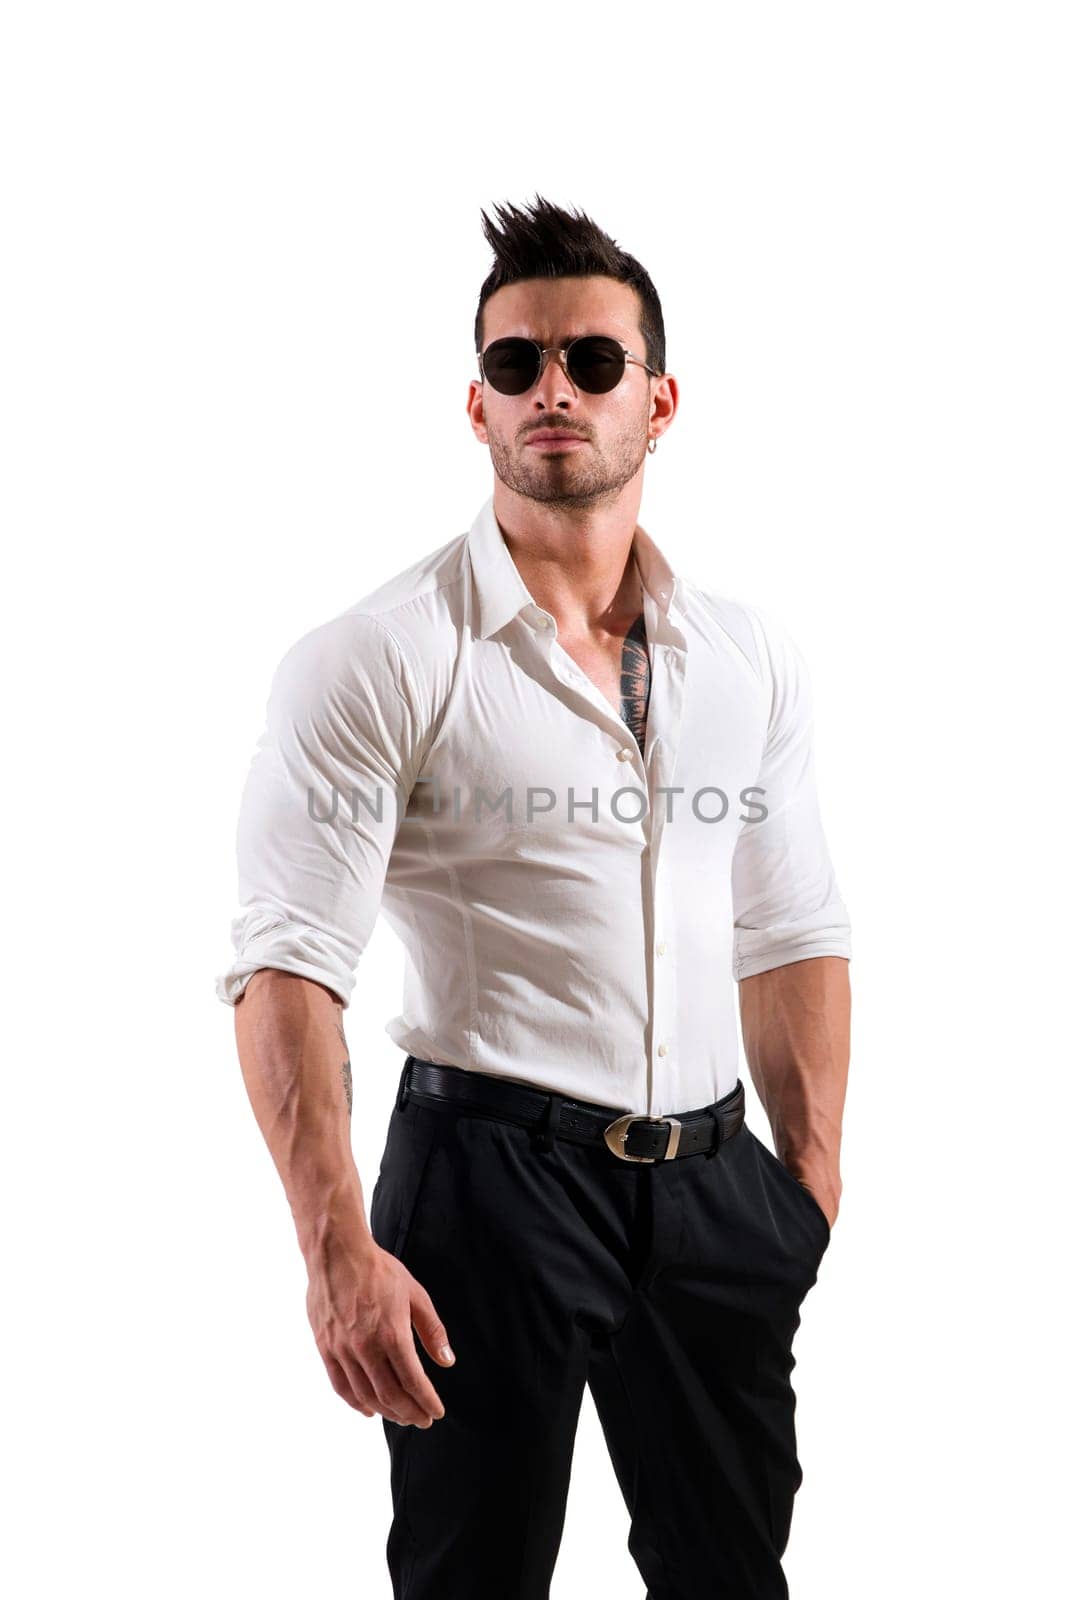 Photo of a muscular and attractive man in a white shirt and black pants by artofphoto